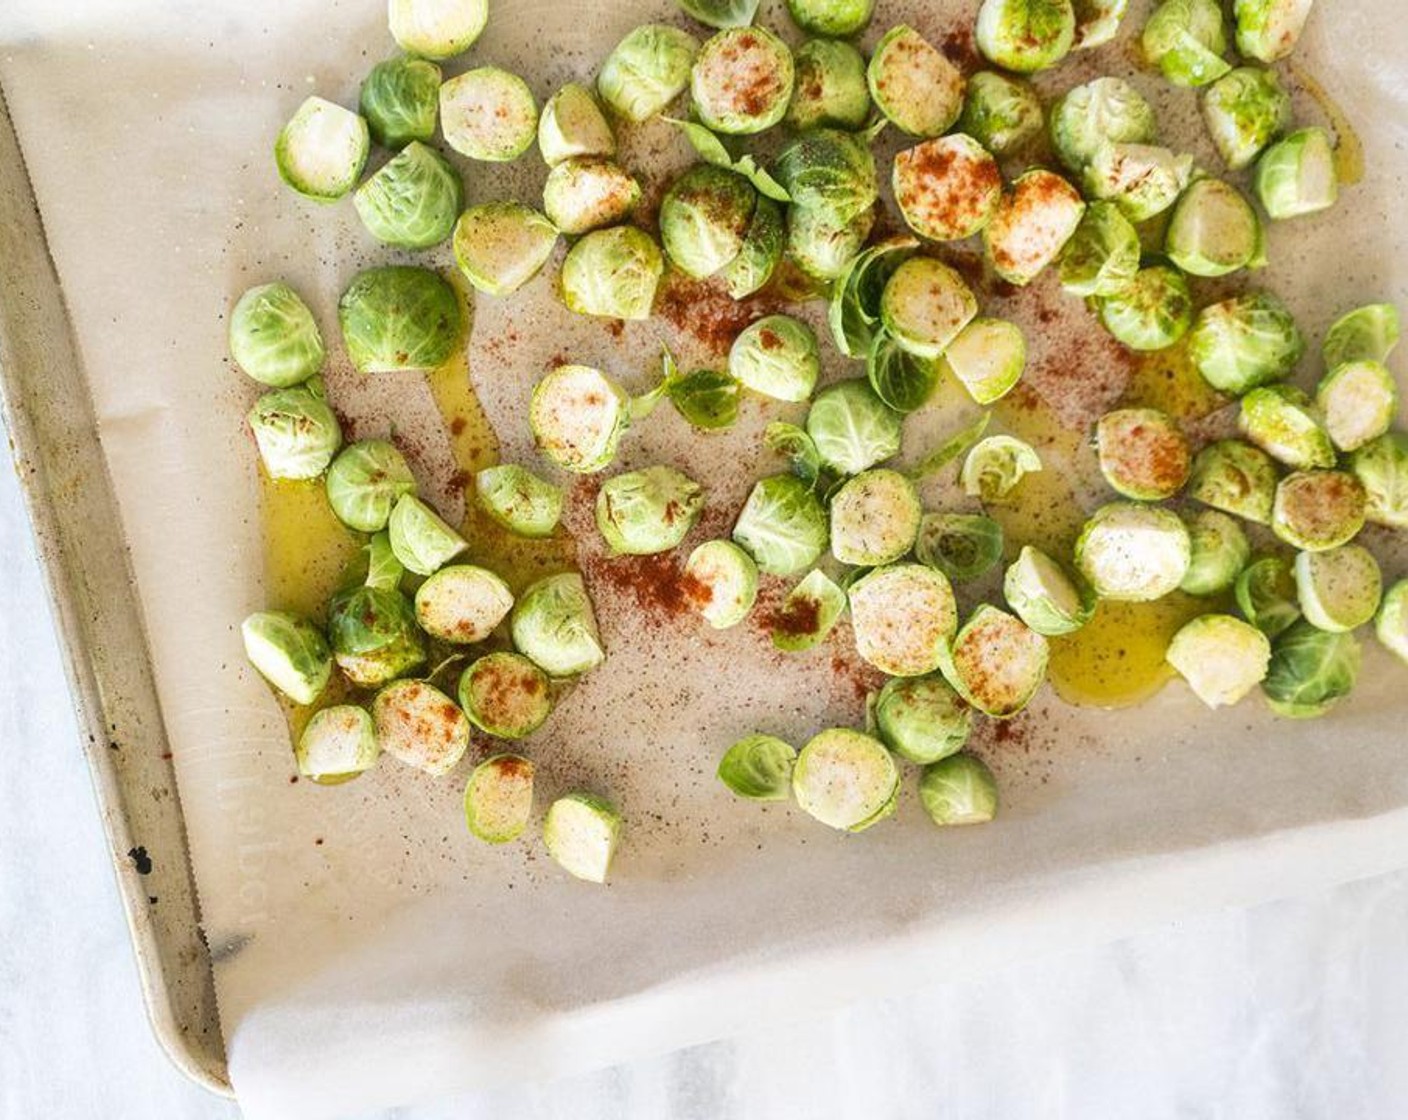 step 3 On a large baking sheet, toss Brussels sprouts in Olive Oil (1/4 cup) and season with Salt (to taste), Ground Black Pepper (to taste), Smoked Paprika (1/2 tsp), and Cayenne Pepper (1/2 tsp).